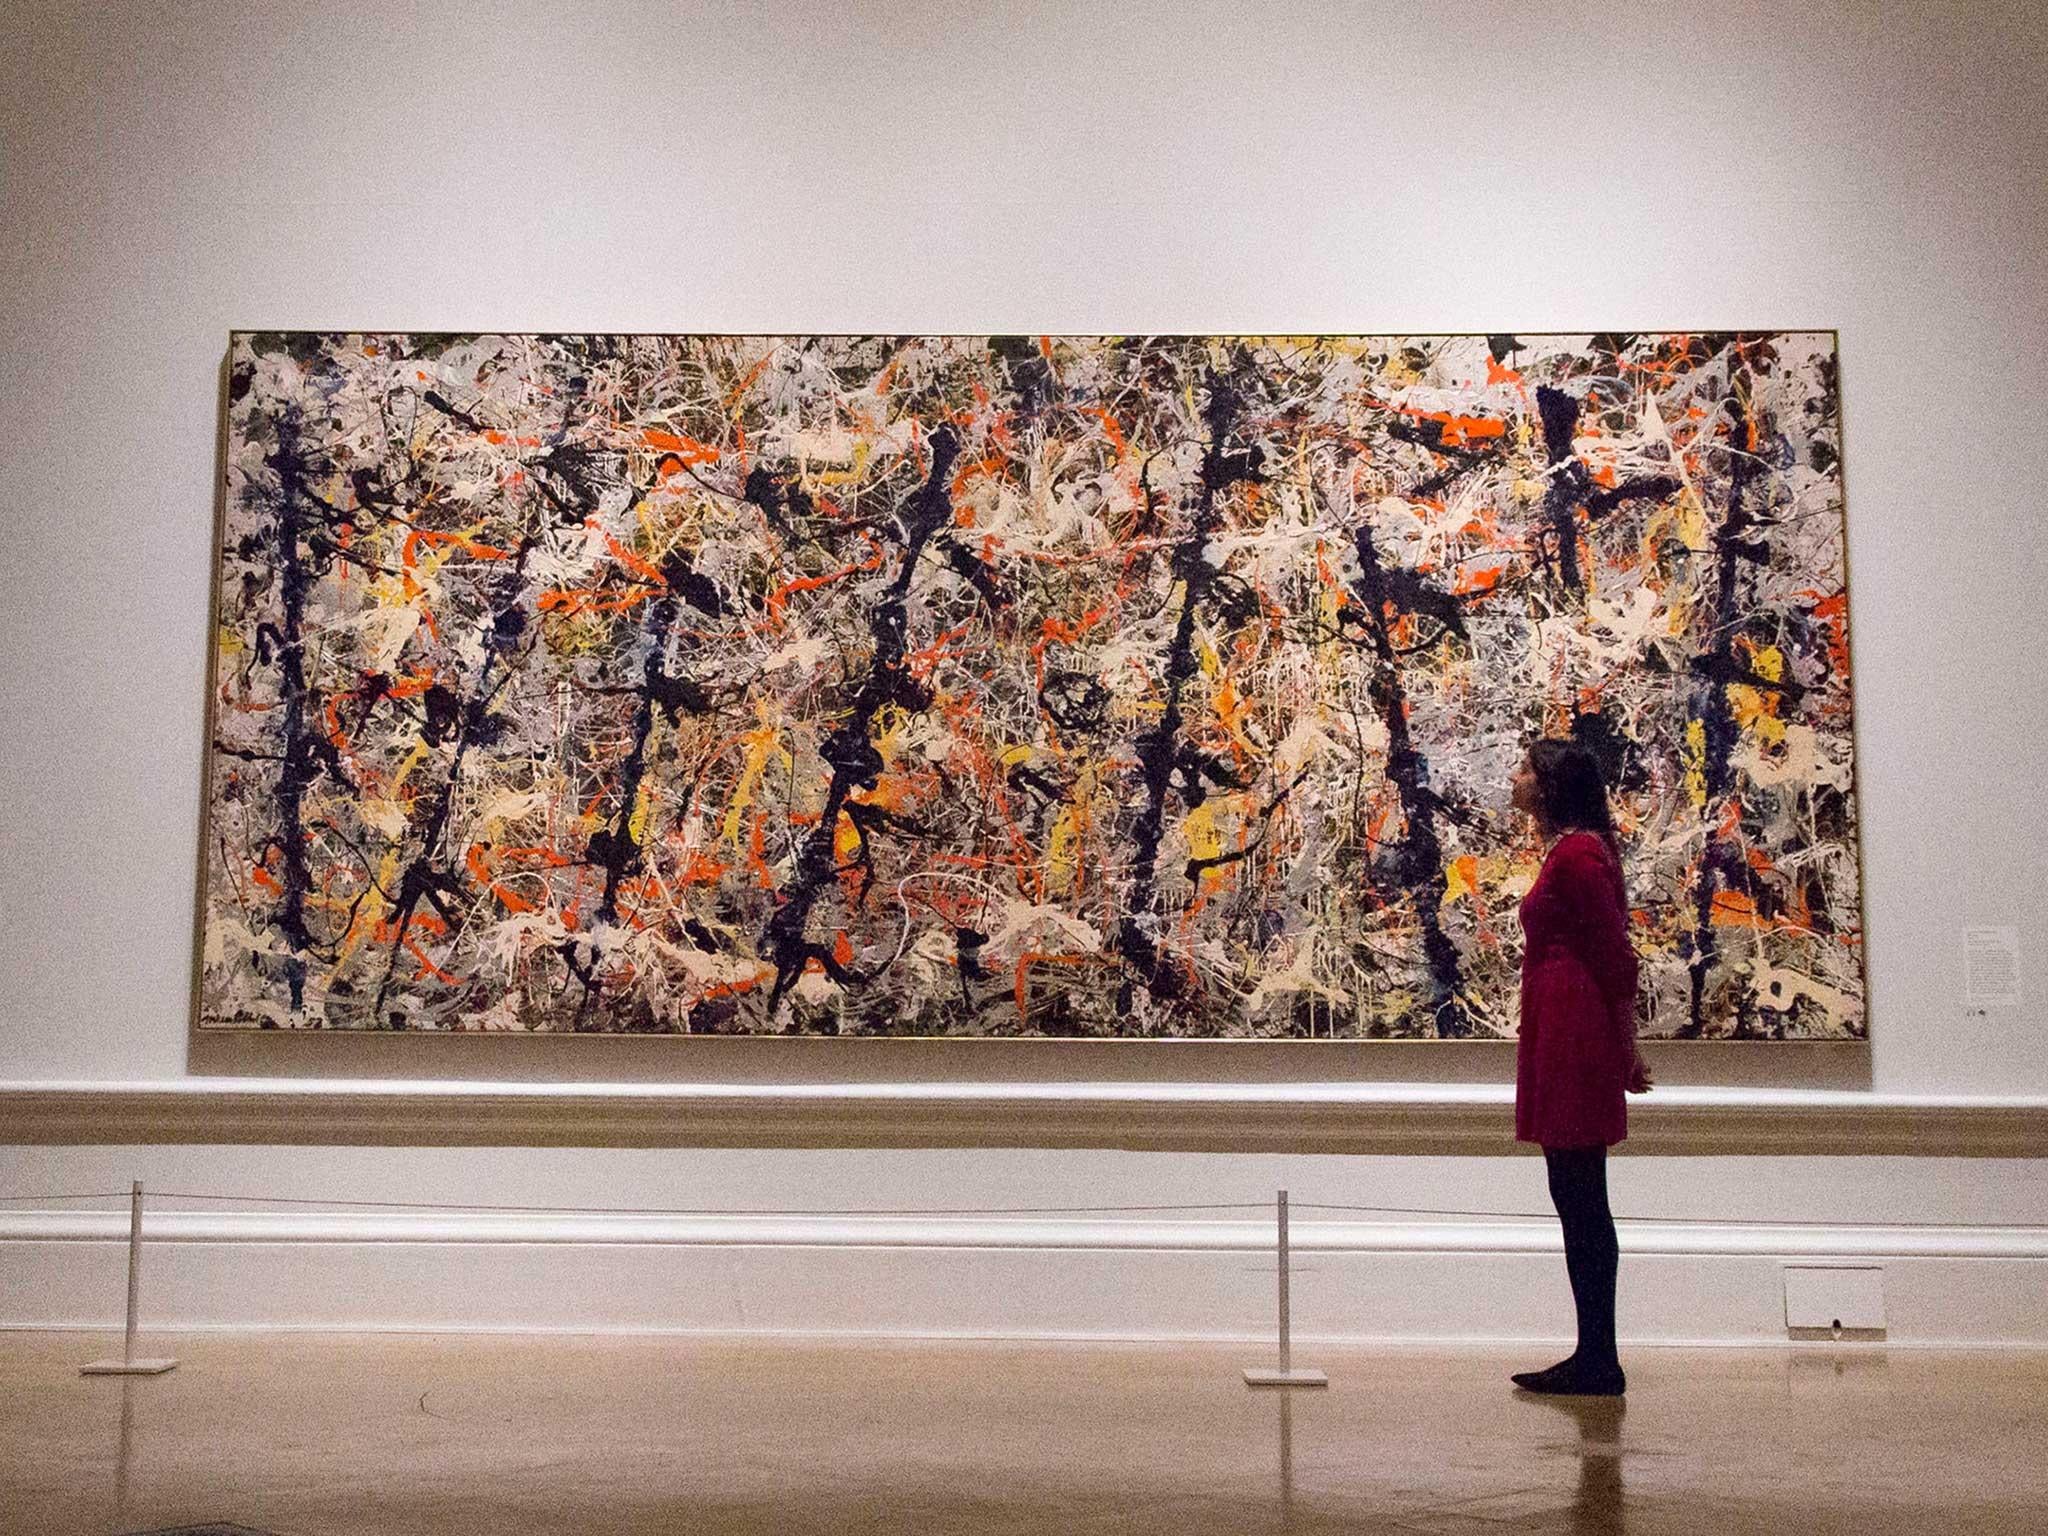 The Royal Academy is touting tours of Jackson Pollock's work for those with mobility impairments